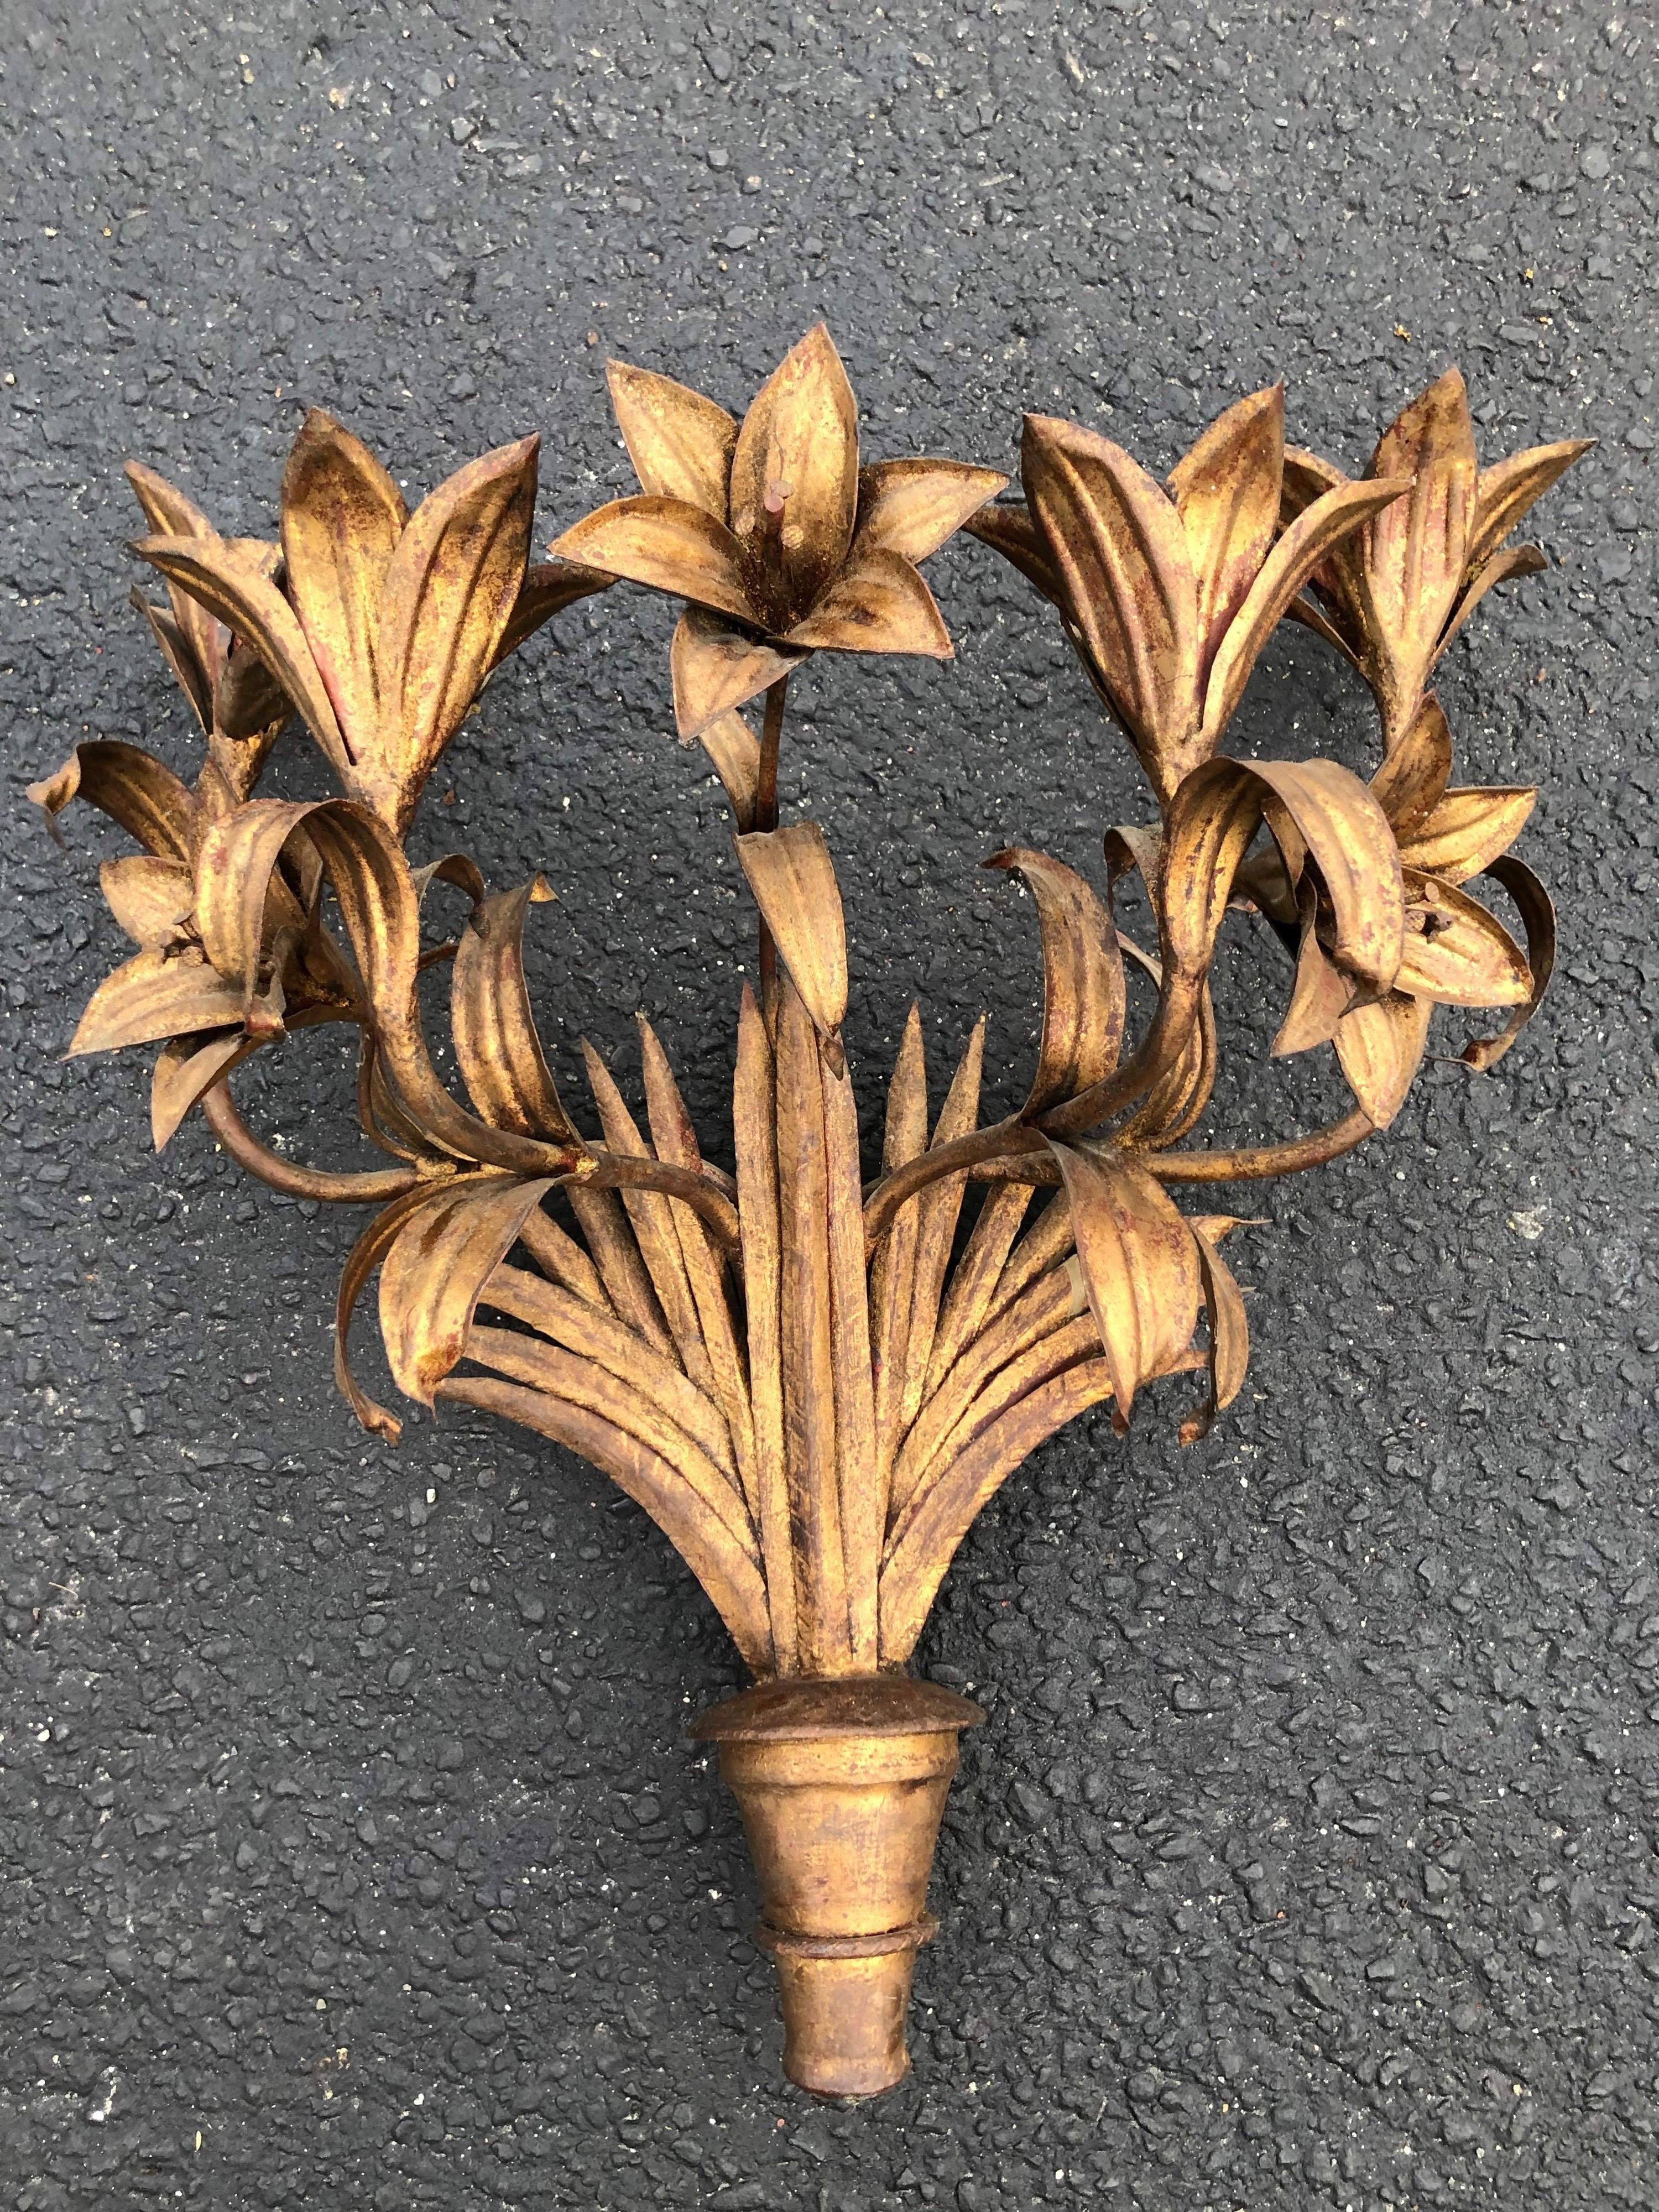 Large Italian gilt iron floral wall sconce. Adorned with five elaborate tiger Lilly flowers. This unique sconce adds texture and depth to any wall. This is not a light fixture but a decorative object. The pointed bouquet bottom is made of wood. This